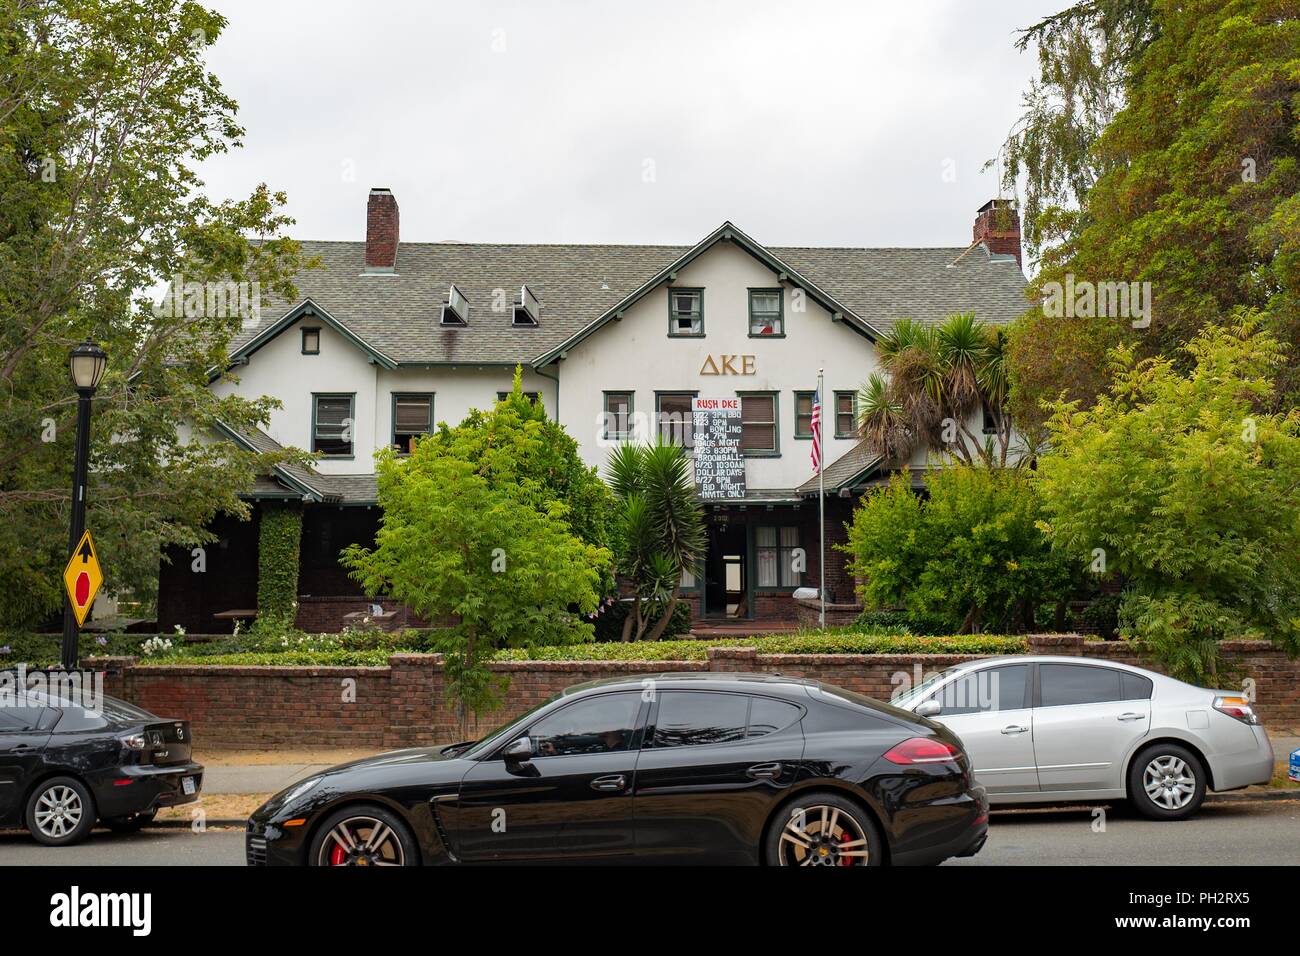 povišen fašizam entitet  Fraternity house for the Delta Kappa Epsilon fraternity at UC Berkeley in  Berkeley, California, with posted advertising rush events, August 21, 2018  Stock Photo - Alamy